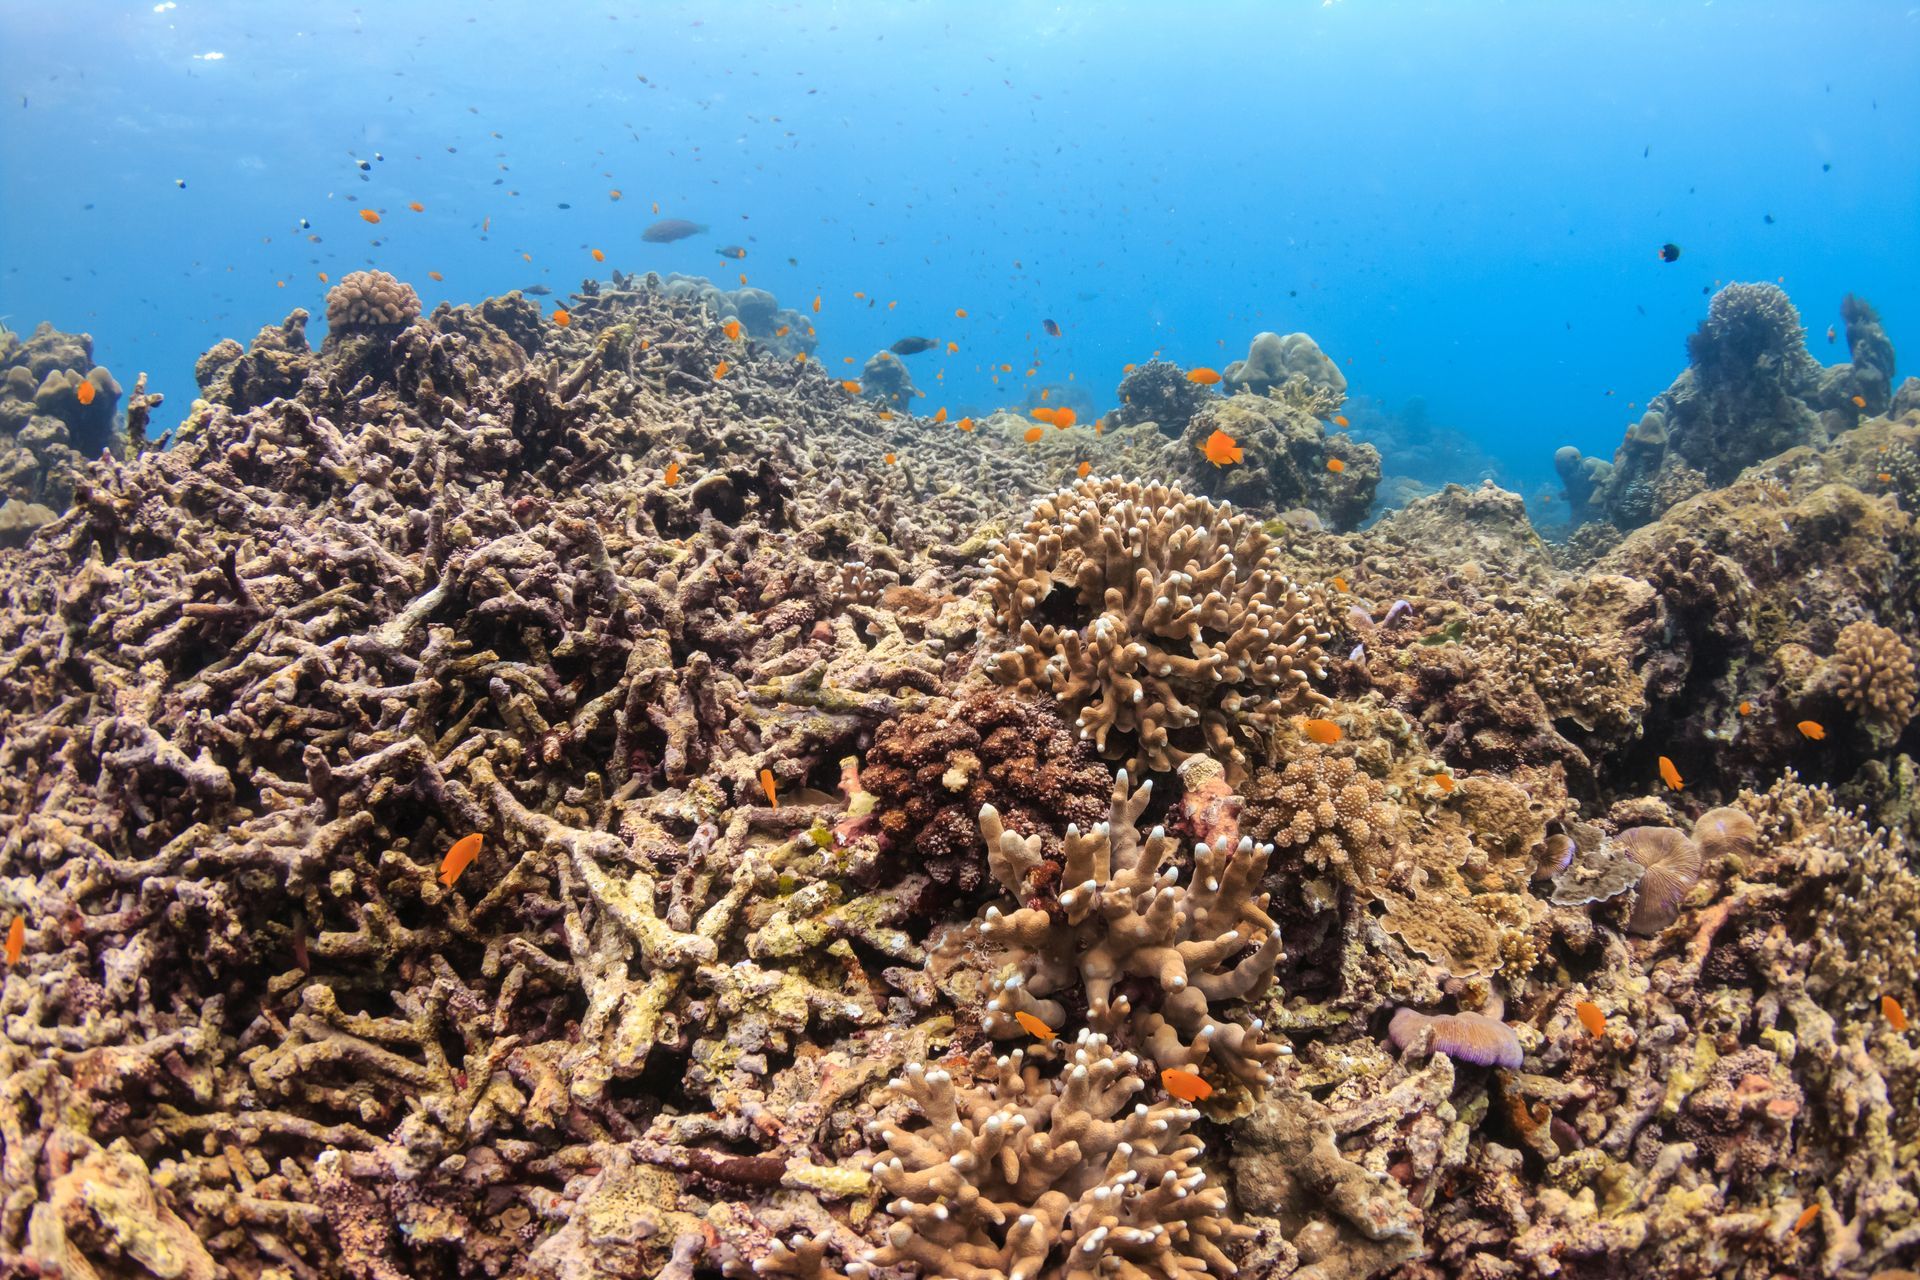 A large area of bleached, dead coral on a tropical reef in the Andaman Sea (Thailand).